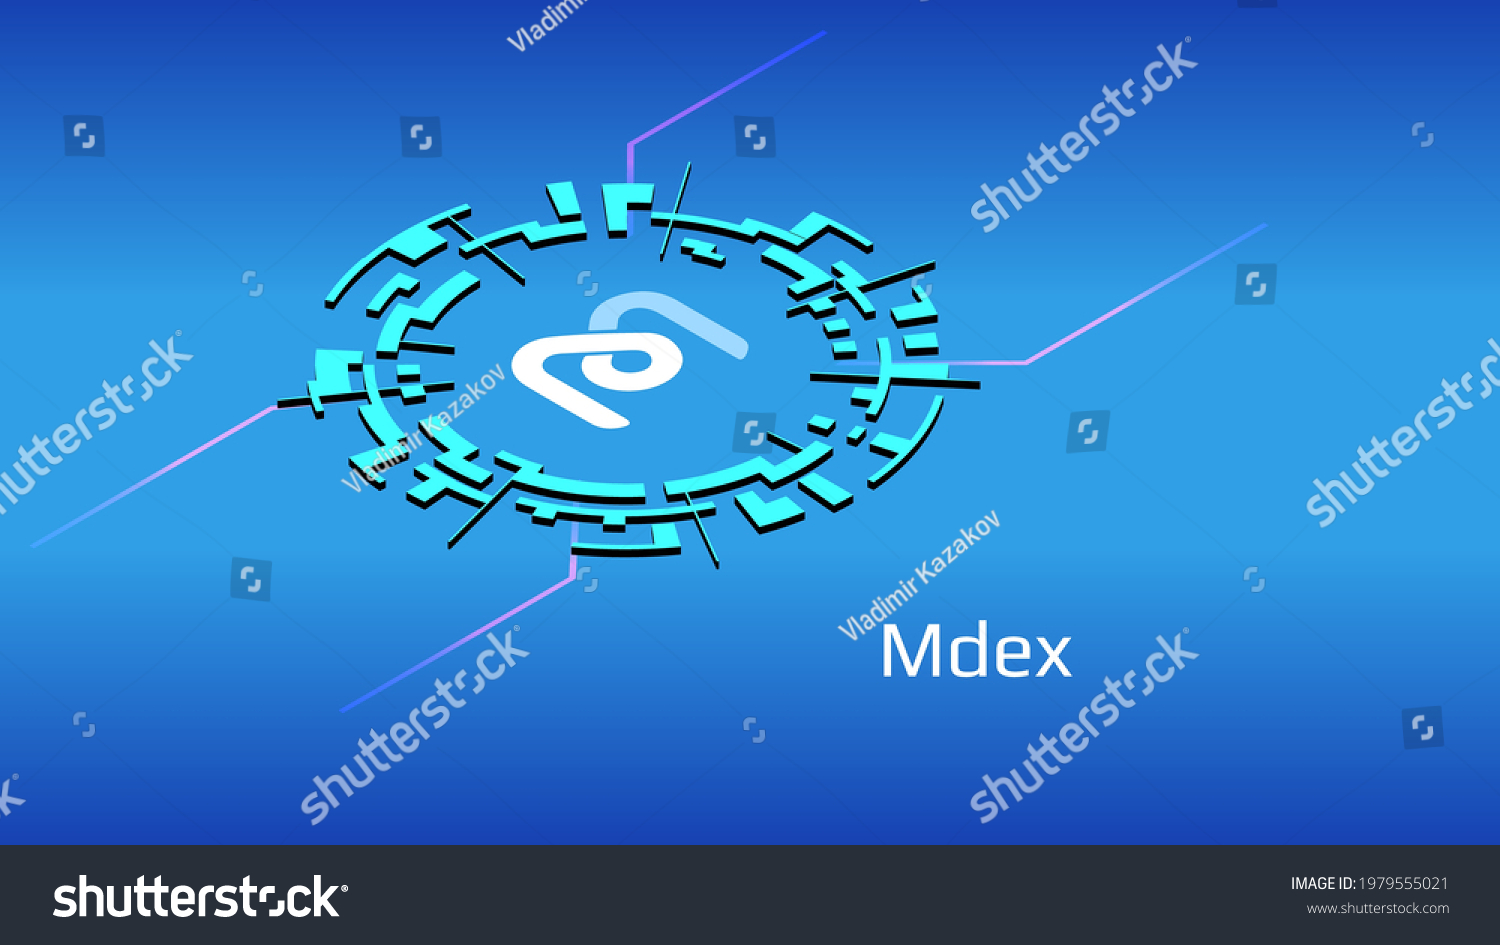 SVG of Mdex MDX isometric token symbol of the DeFi project in digital circle on blue background. Cryptocurrency coin icon. Decentralized finance programs. Vector illustration. svg